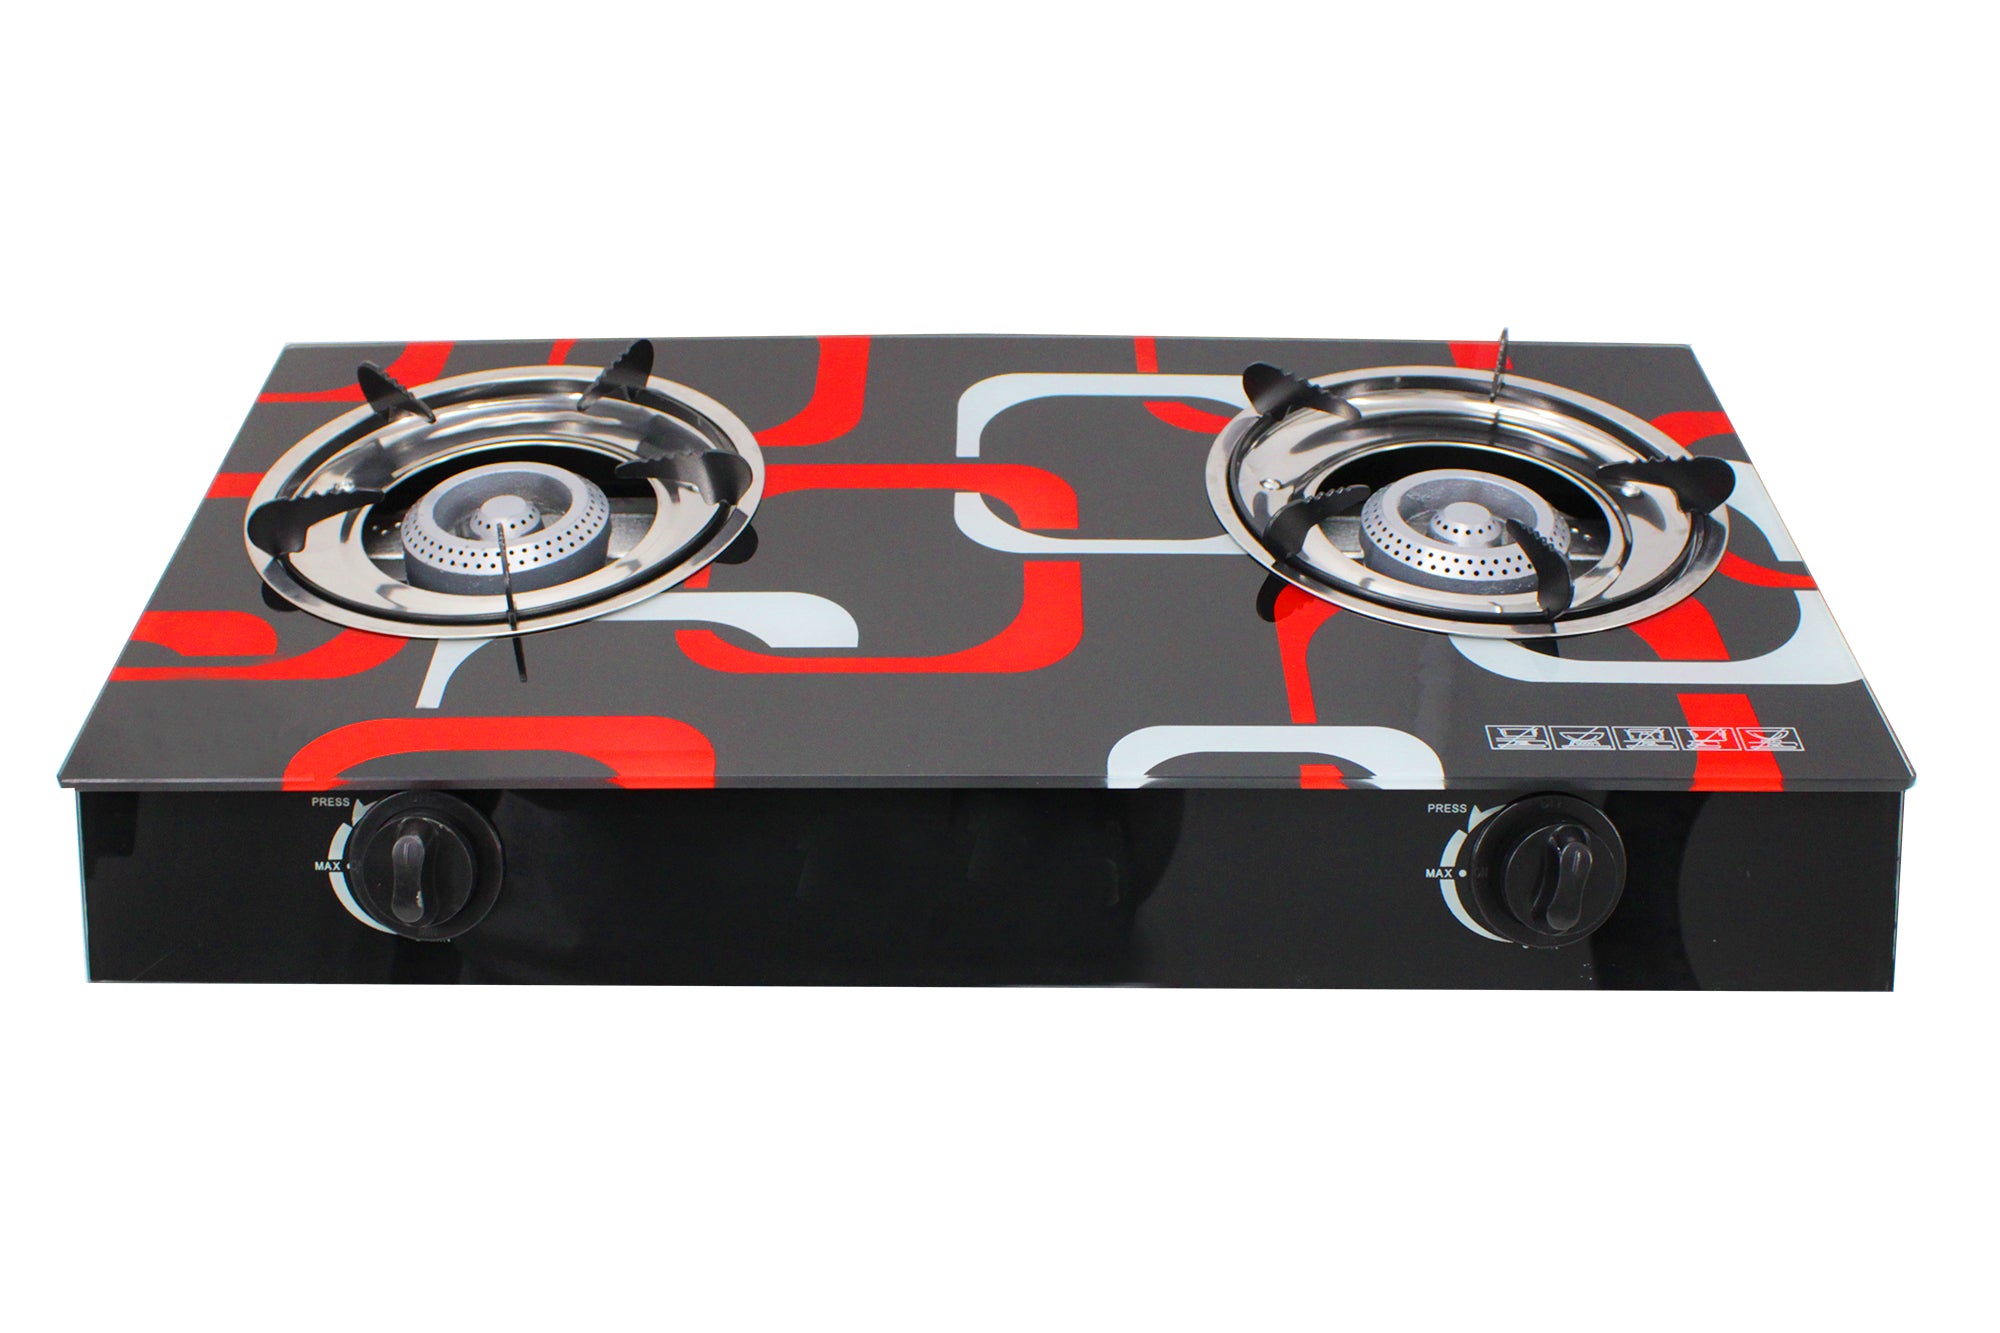 Two Burner Auto-Ignition Tempered Glass Panel Gas Stove - Red Square Edition